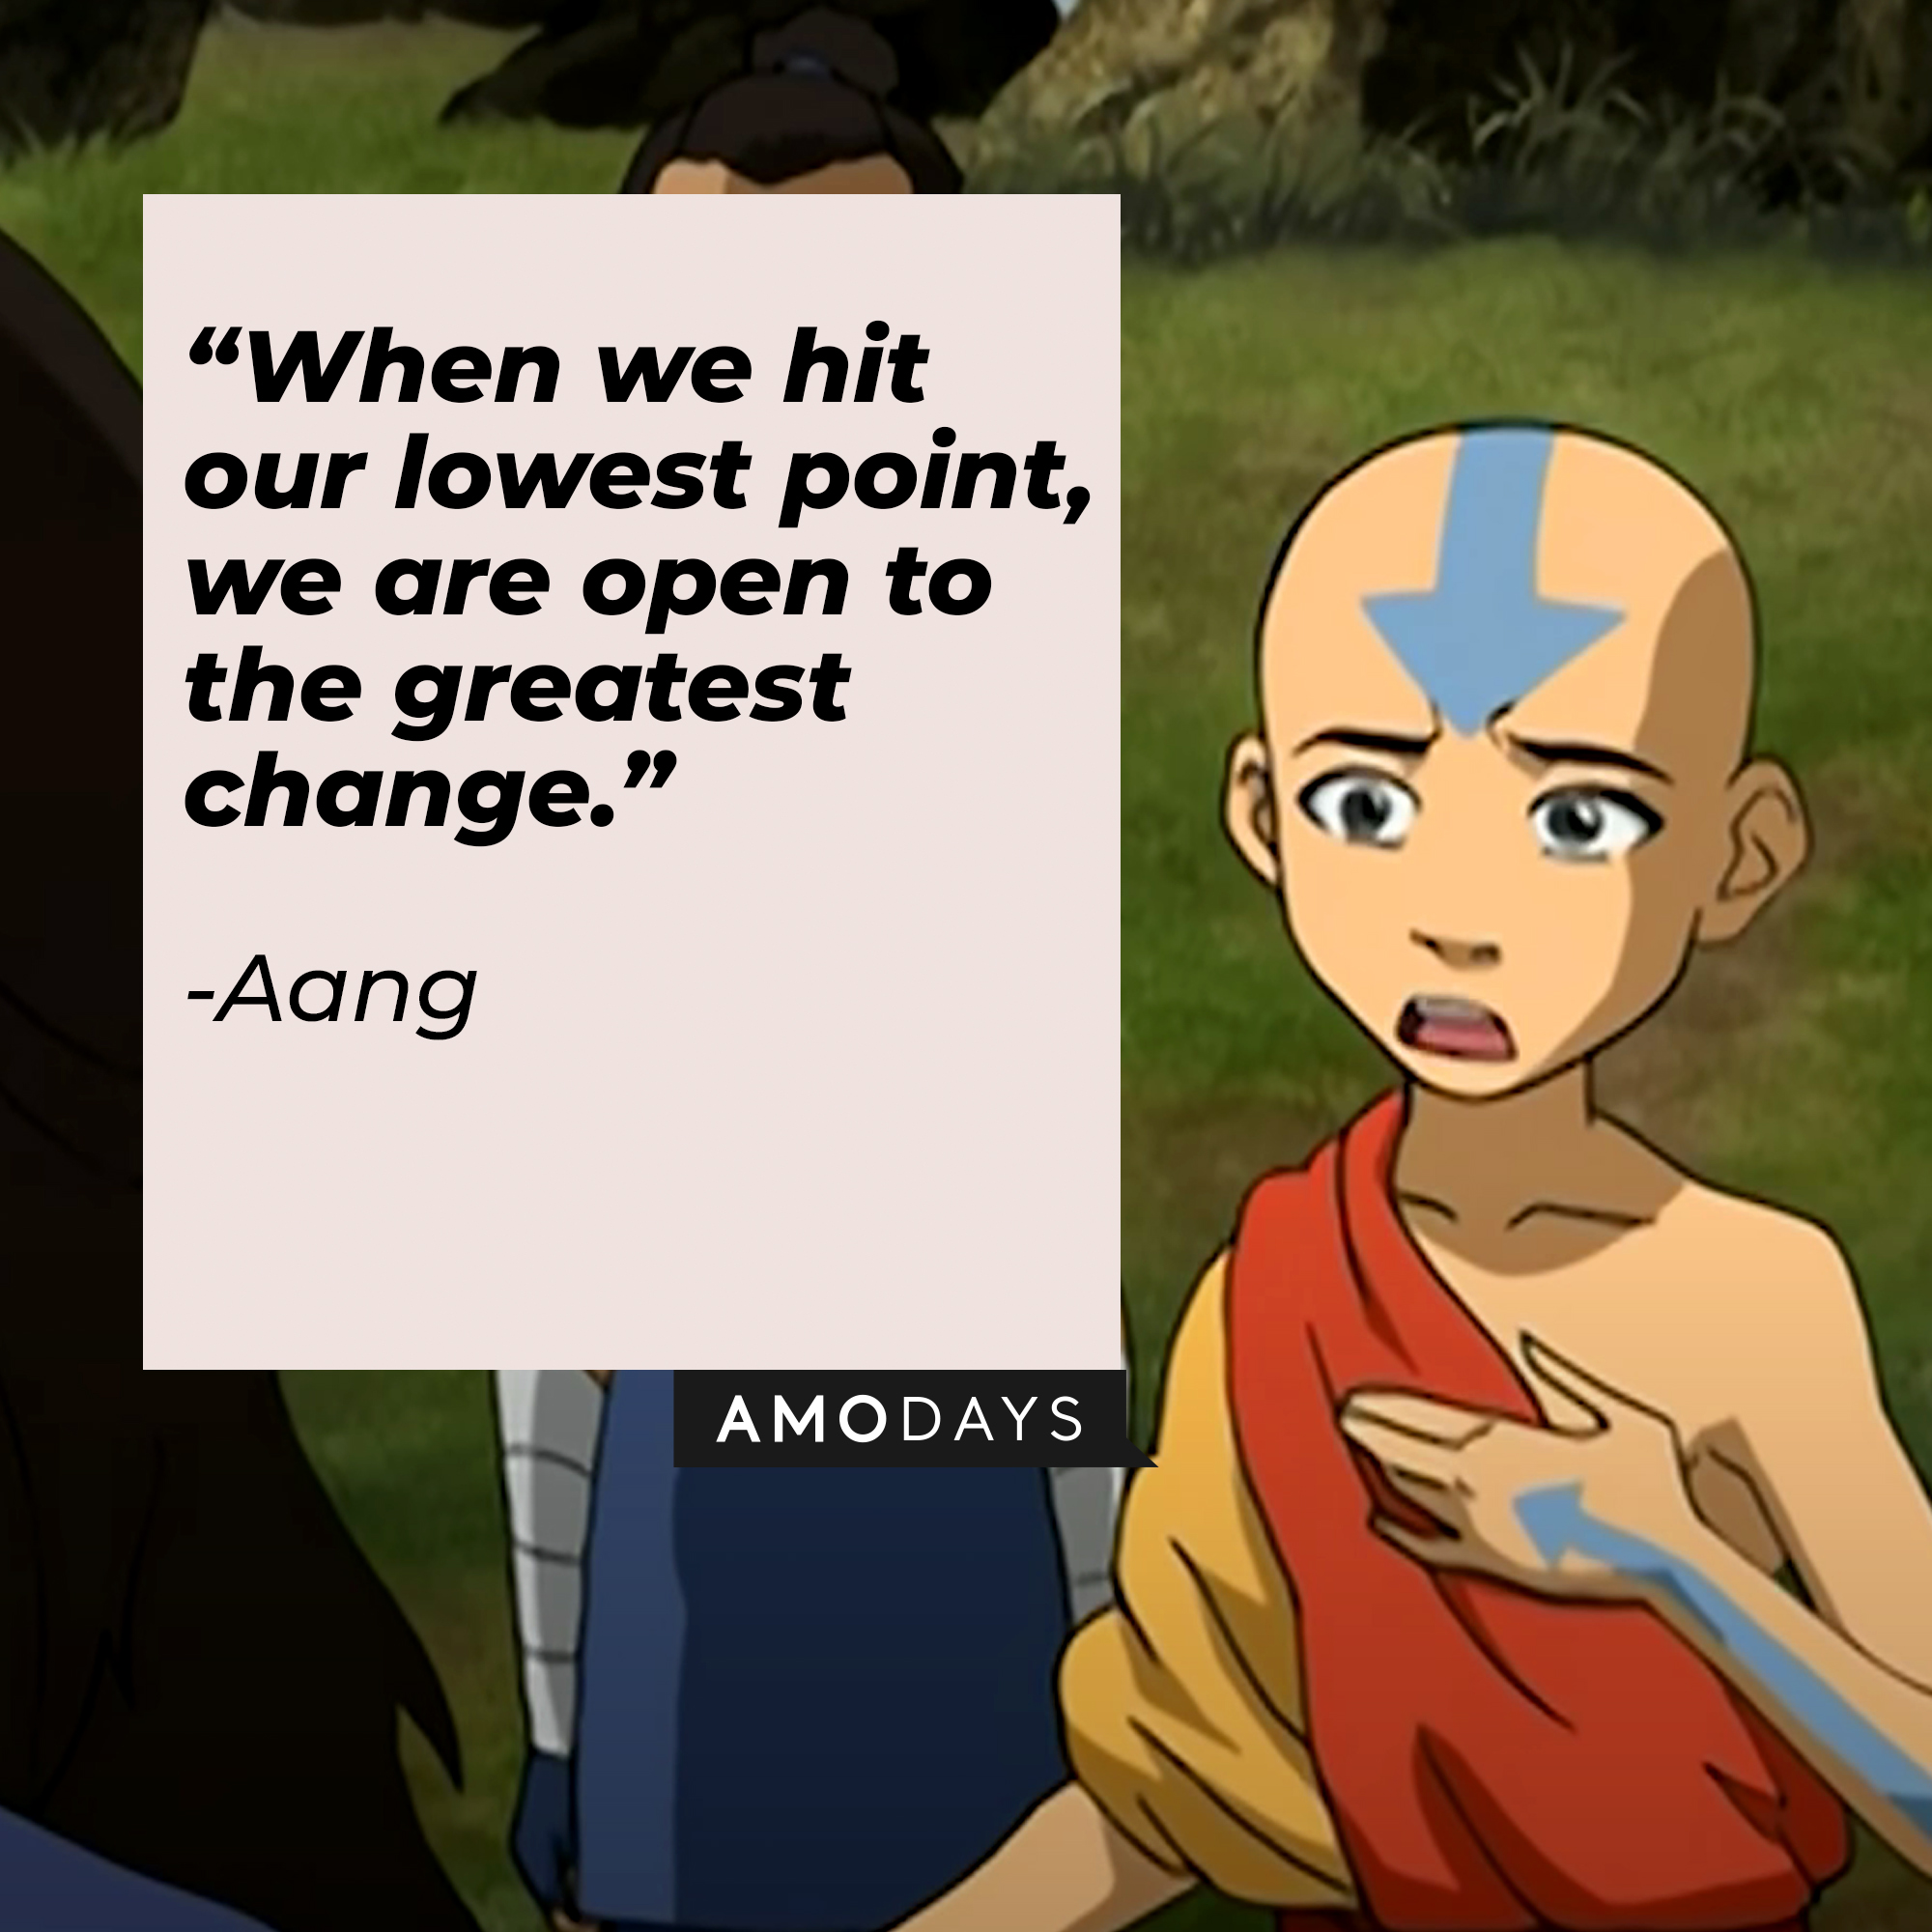 Aang’s quote: “When we hit our lowest point, we are open to the greatest change.” | Source: Youtube.com/TeamAvatar